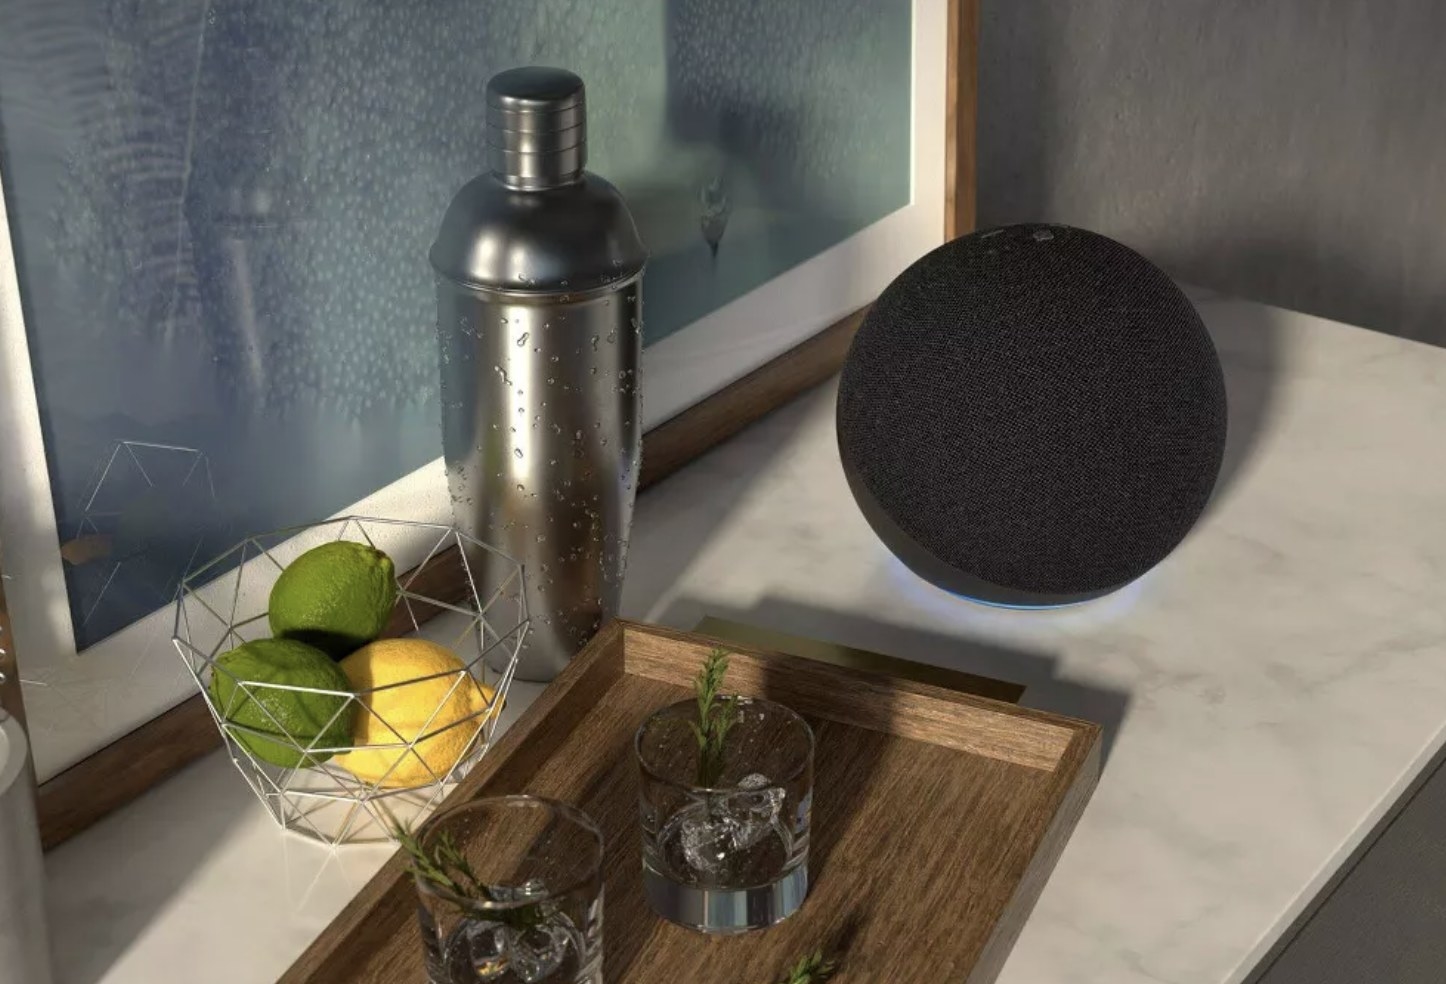 the black Echo speaker on counter next to kitchen serving tray with drinks and bowl of lemons and limes